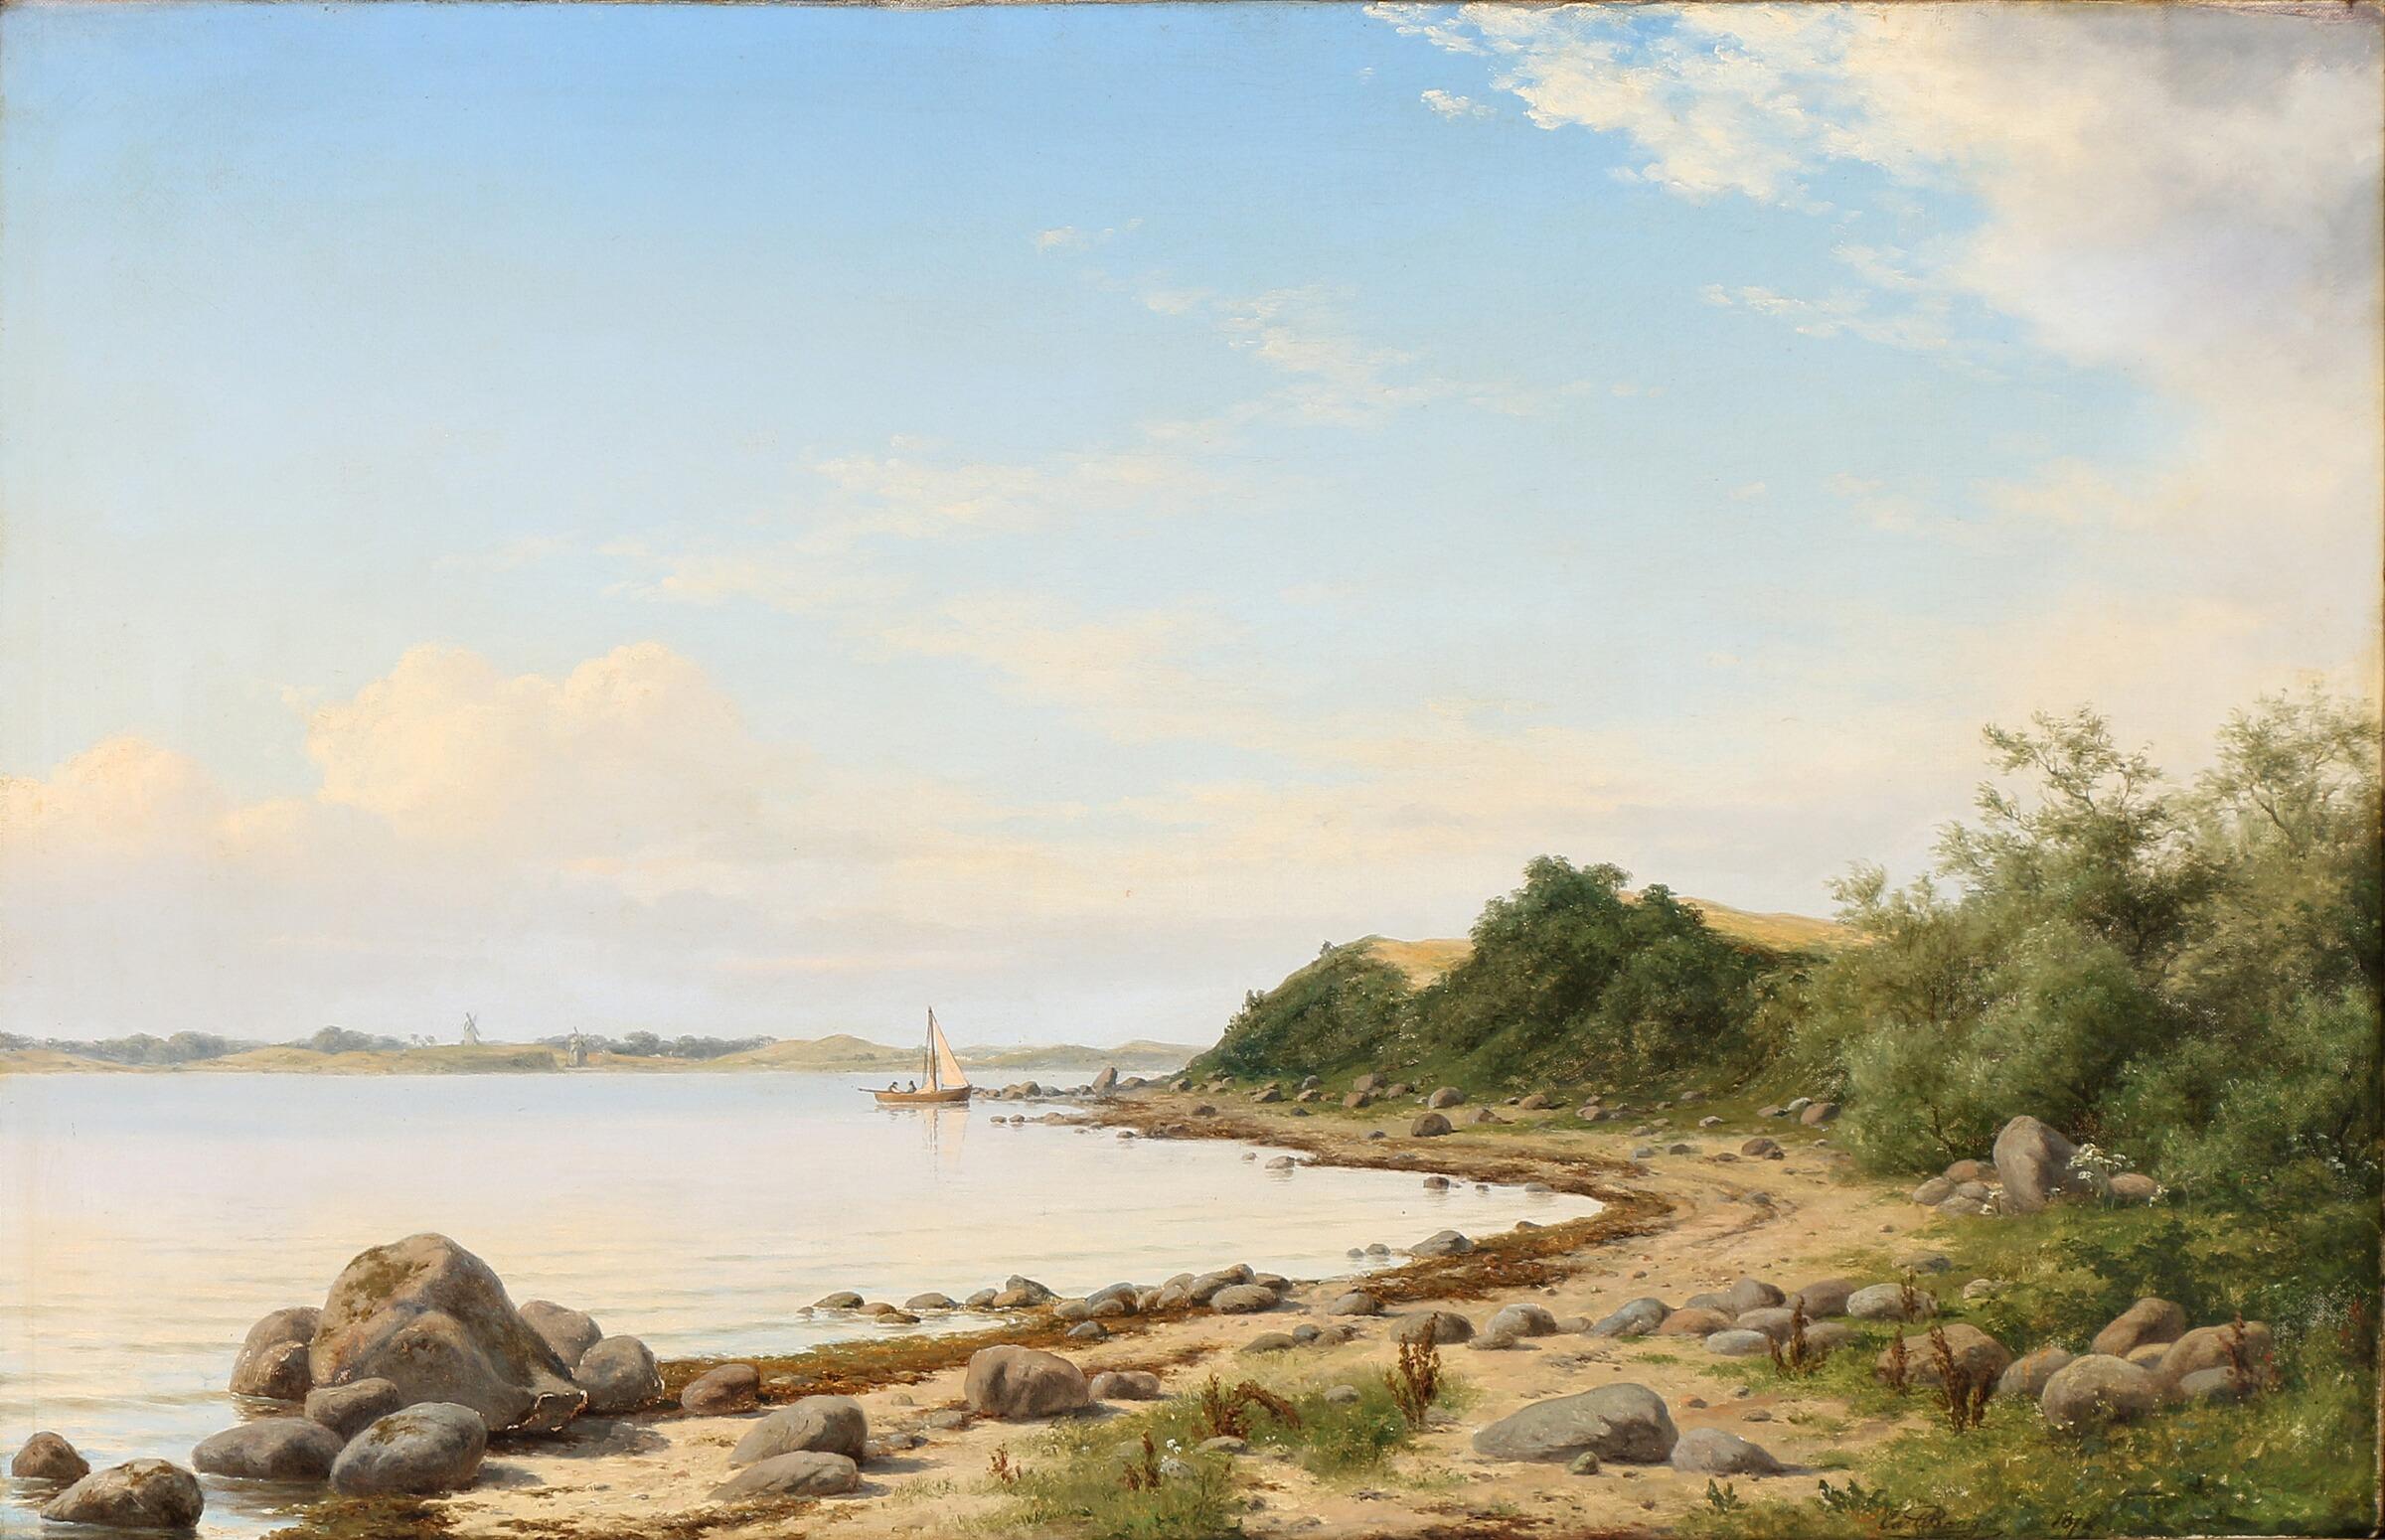 Carl Baagøe, Danish Marine artist 1829-1902: Coastal scape with sail boat and drifting clouds. Signed and dated Carl Baagøe, 1872. Oil on canvas. Carl Baagoe was a talented artist, studying at the Royal Danish Academy of Fine Arts. He travelled to